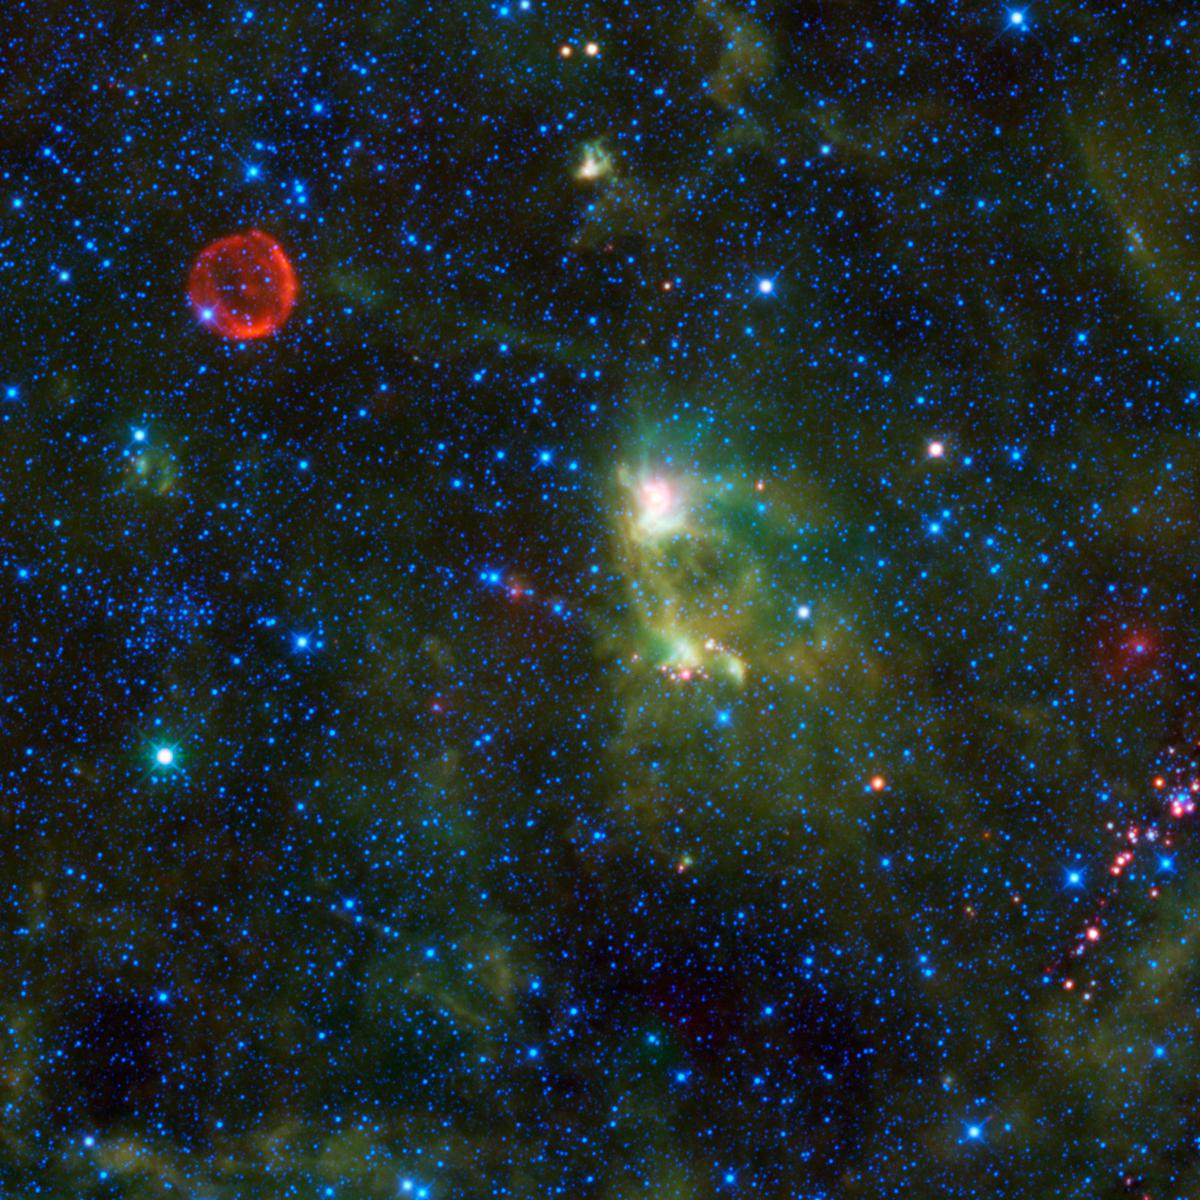 This image provided by the NASA/JPL-Caltech/WISE Team shows NASA’s Wide-field Infrared Survey Explorer (WISE) taking in several interesting objects in the constellation Cassiopeia. The red circle visible in the upper left part of the image is SN 1572, informally called “Tycho’s Supernova”. 